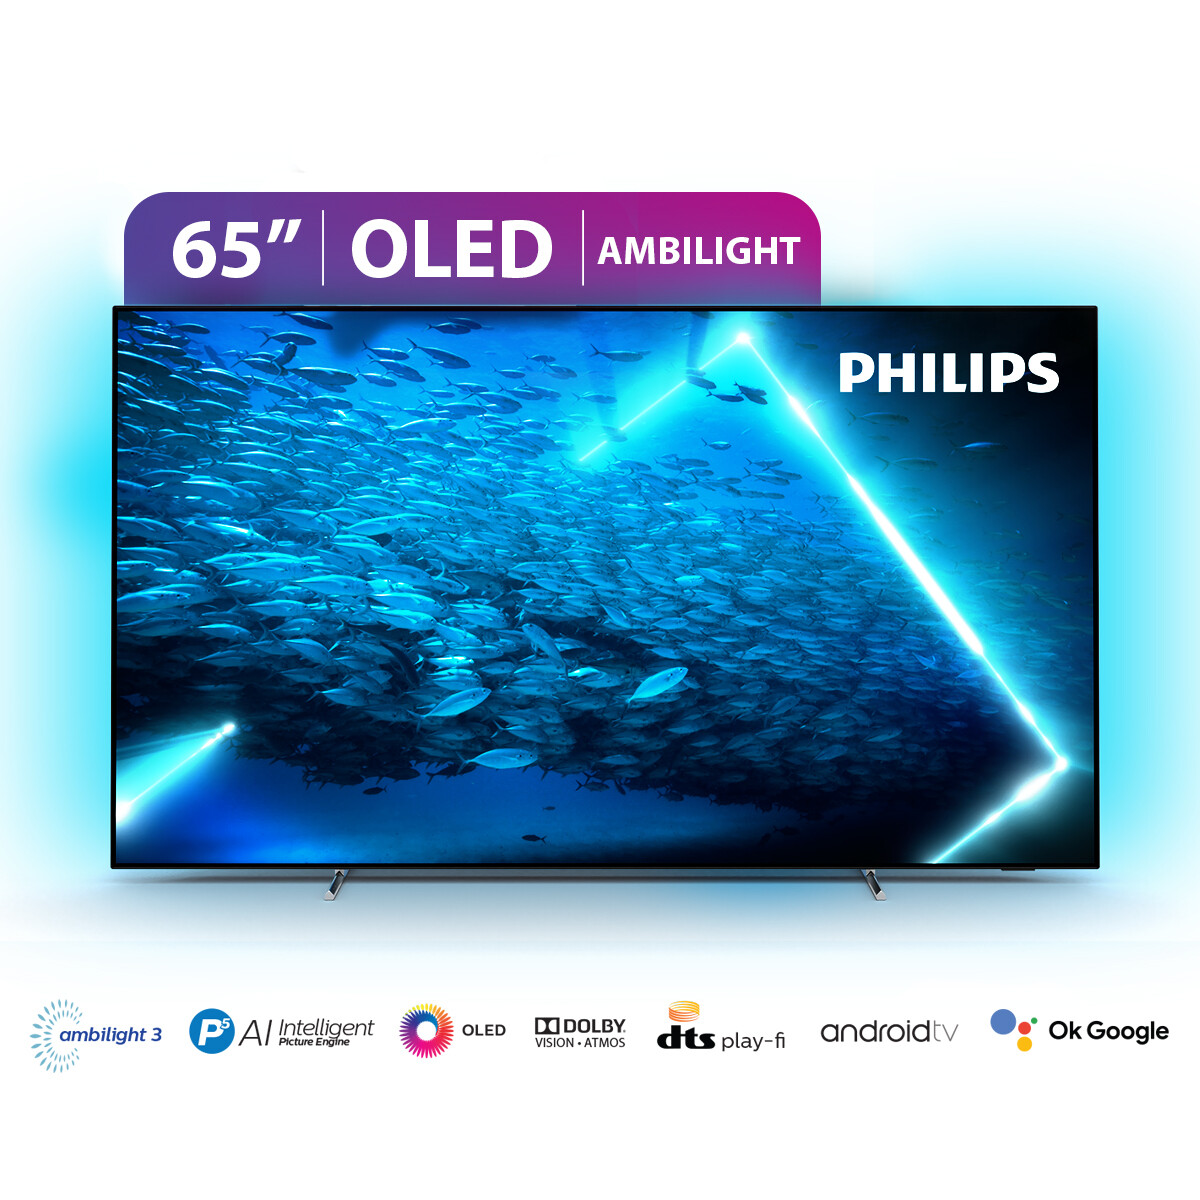 Oled Android Tv 65” Philips 4K con Ambilight 